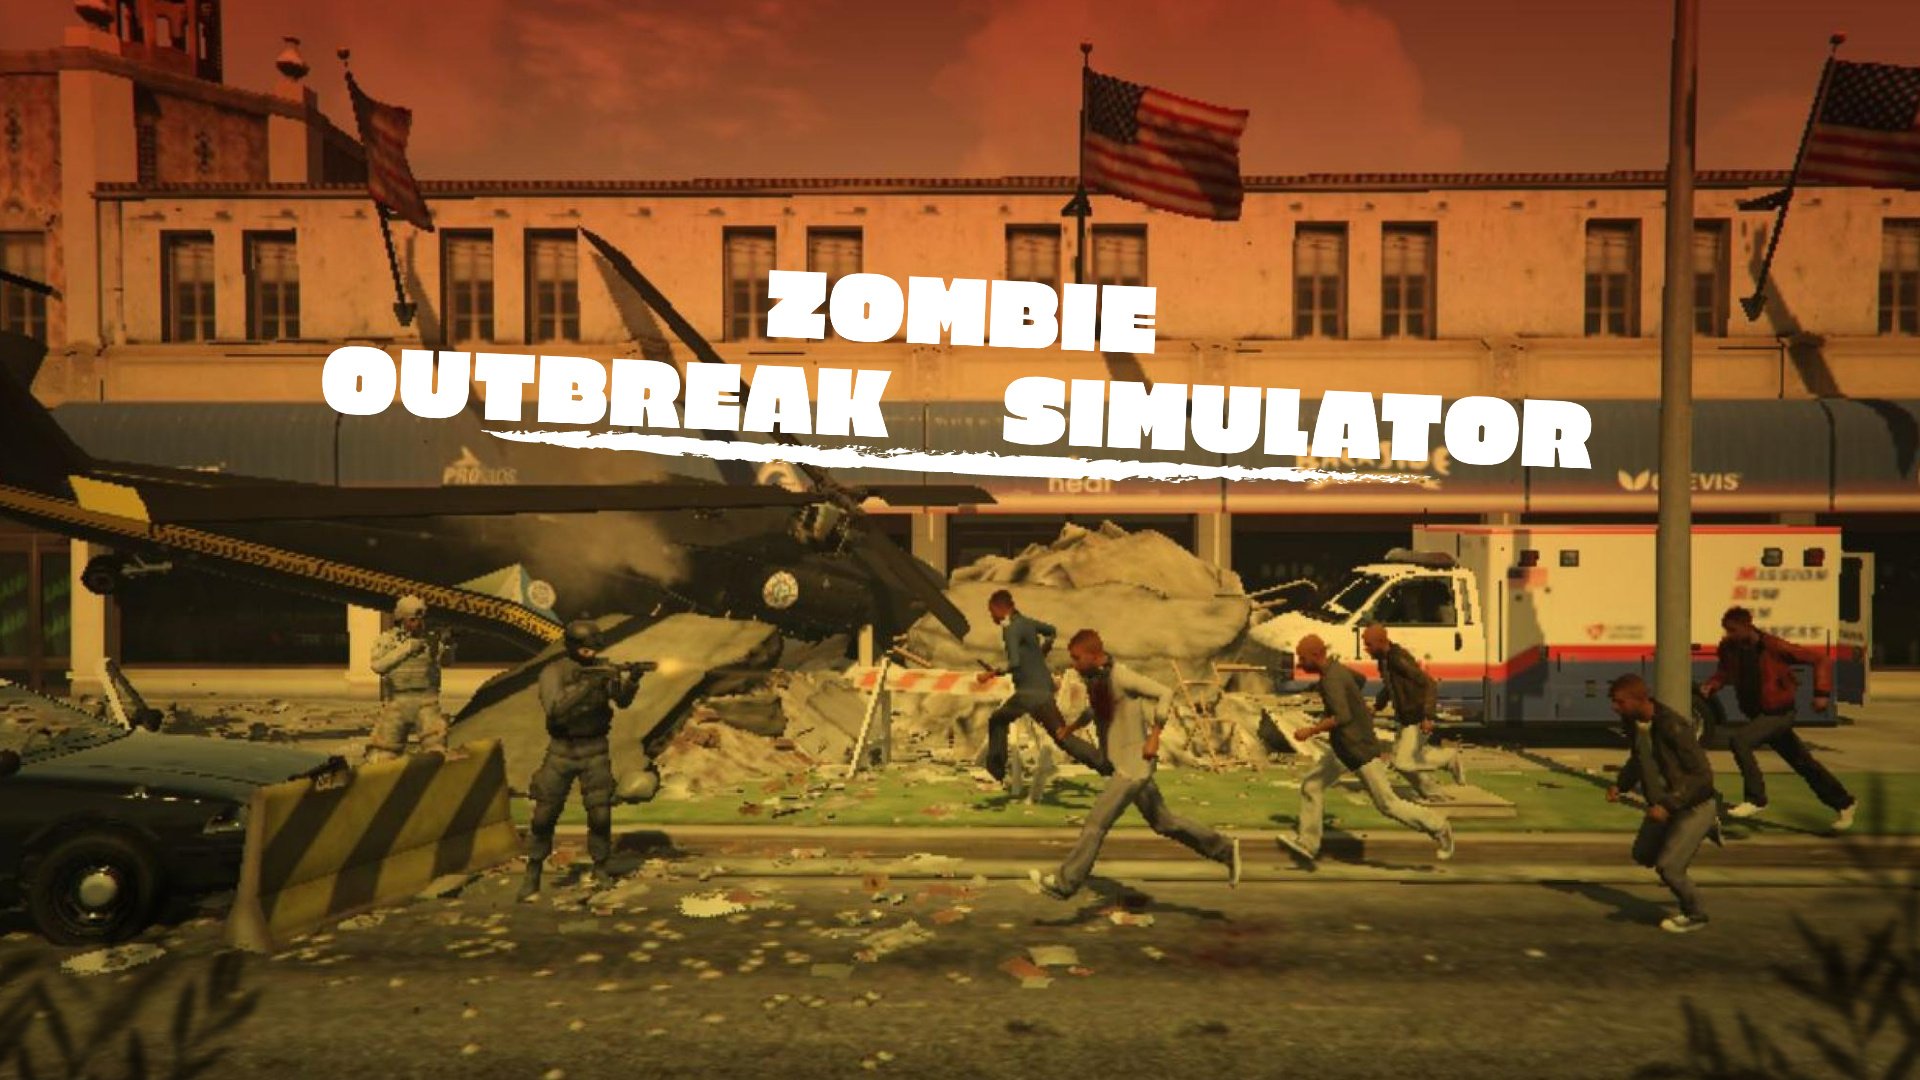 outbreak zombies